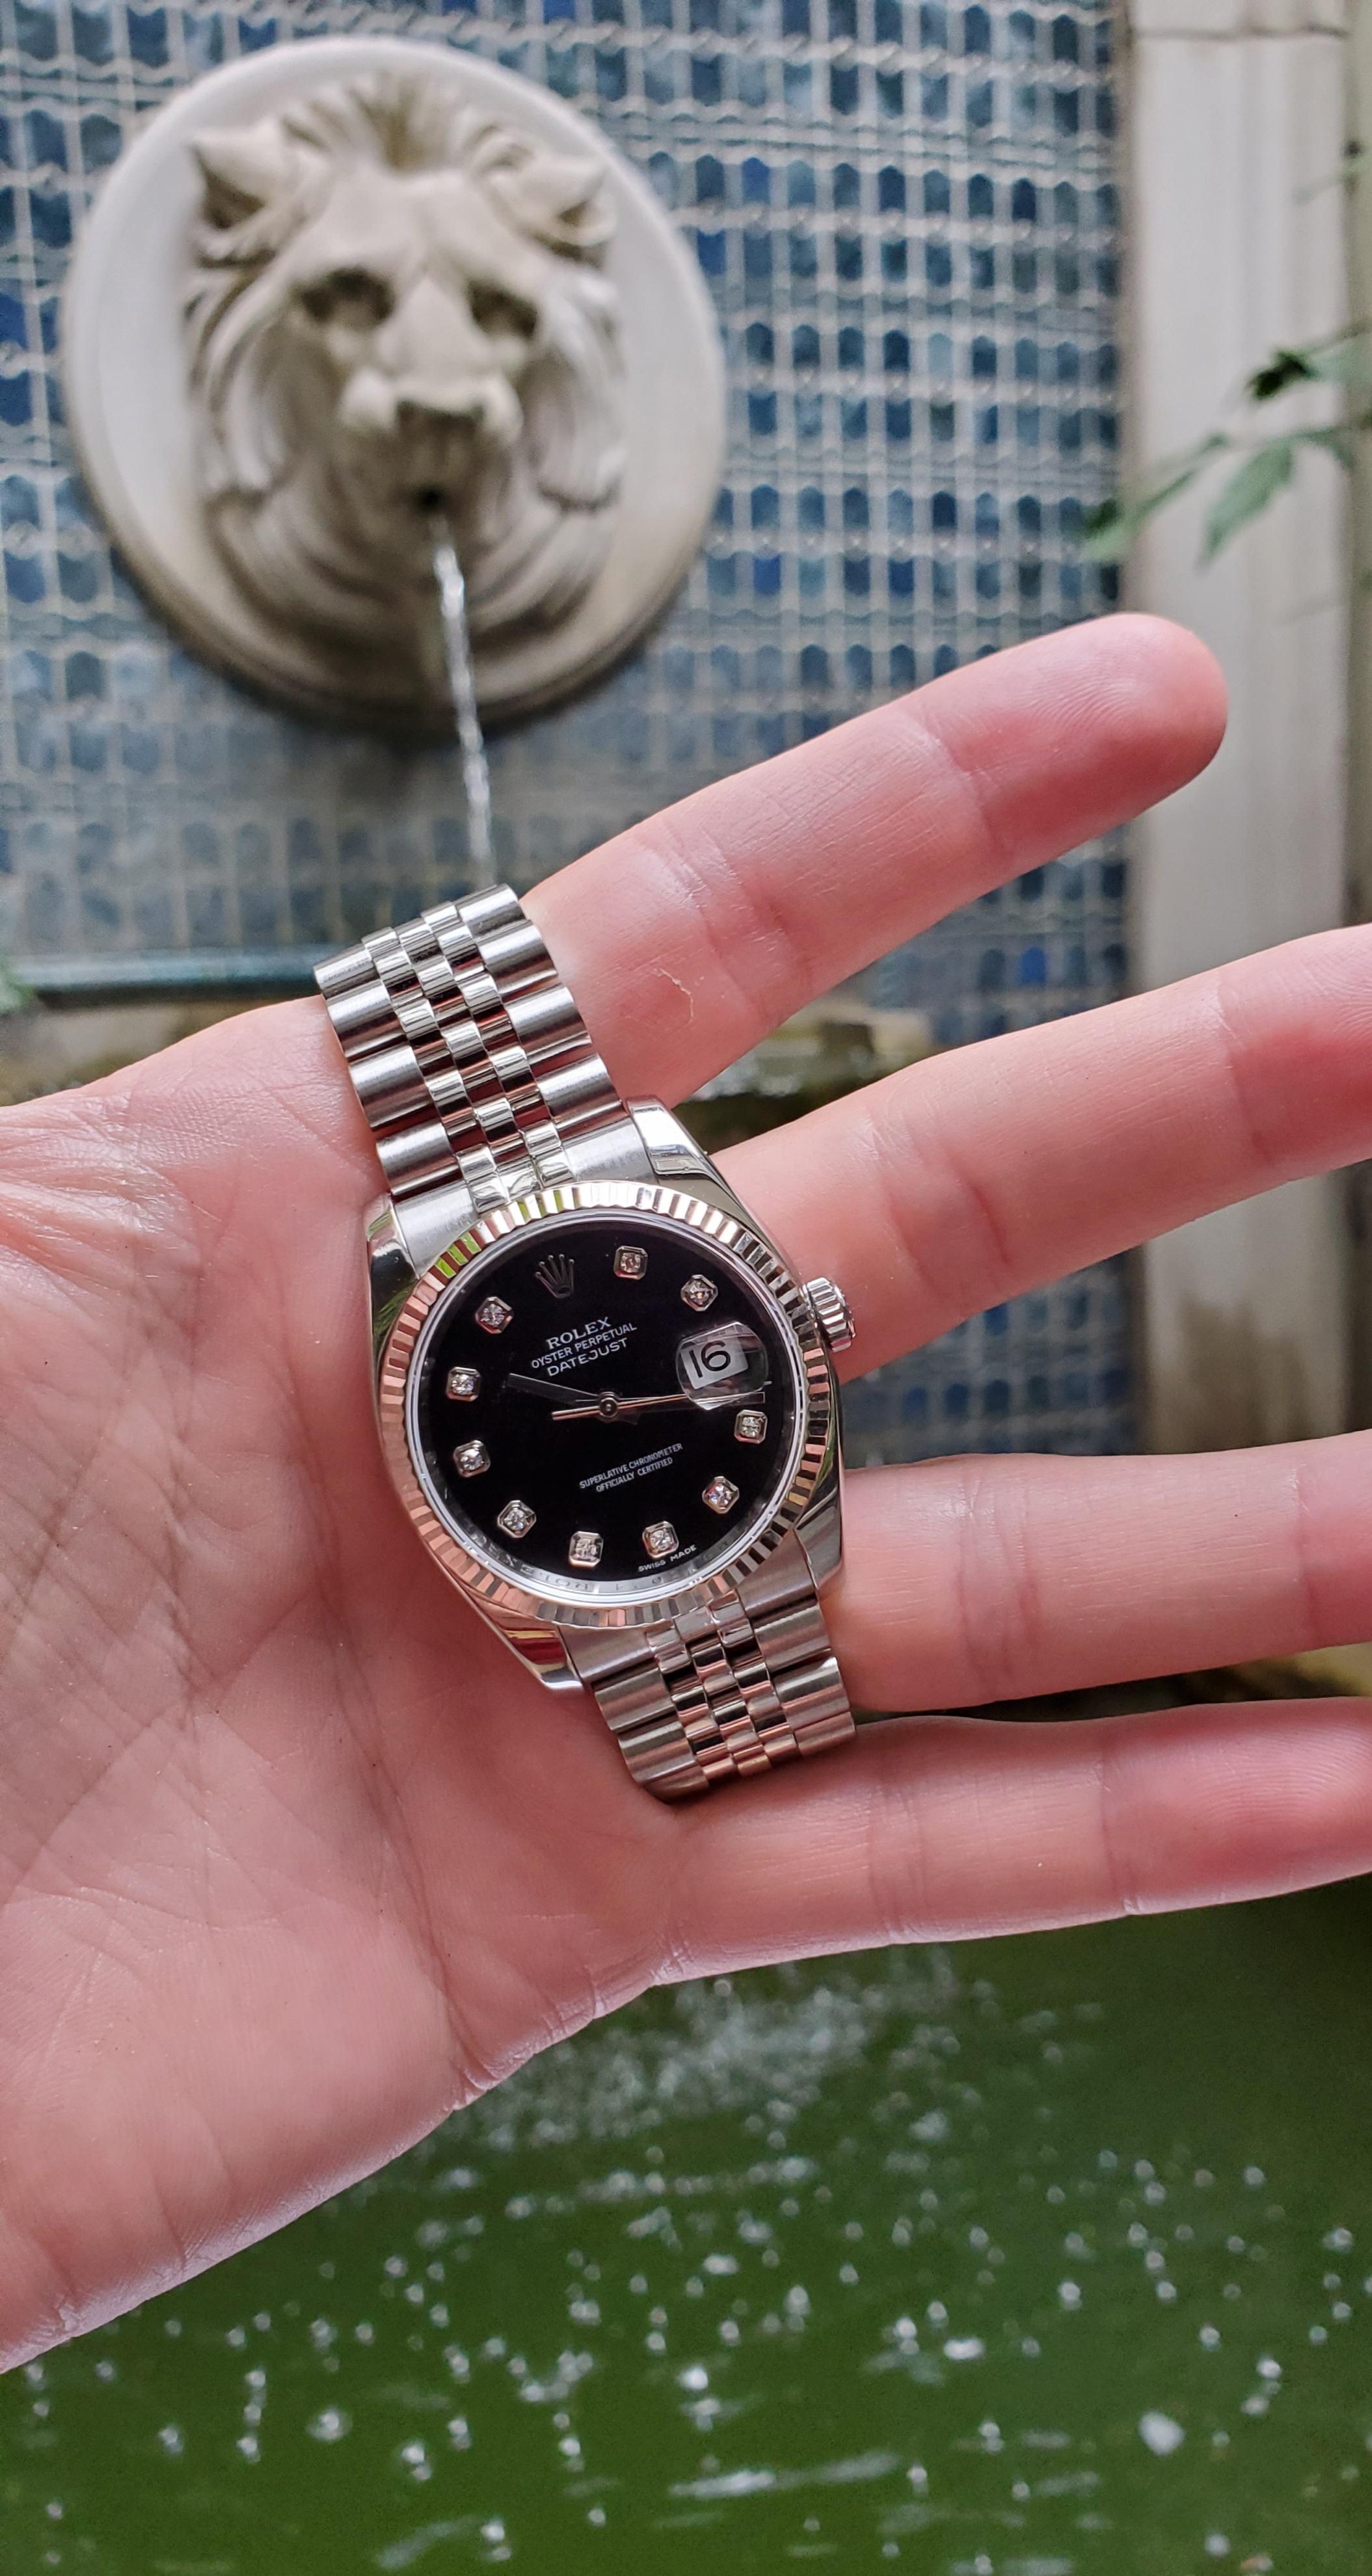 Striking, vintage 36mm Rolex Datejust with factory diamond dial. Black diamond dial has diamonds at the hour markers (slight dial patina at 10 o'clock). There is an 18kt white gold fluted style bezel. The bracelet is a jubilee link with new hidden